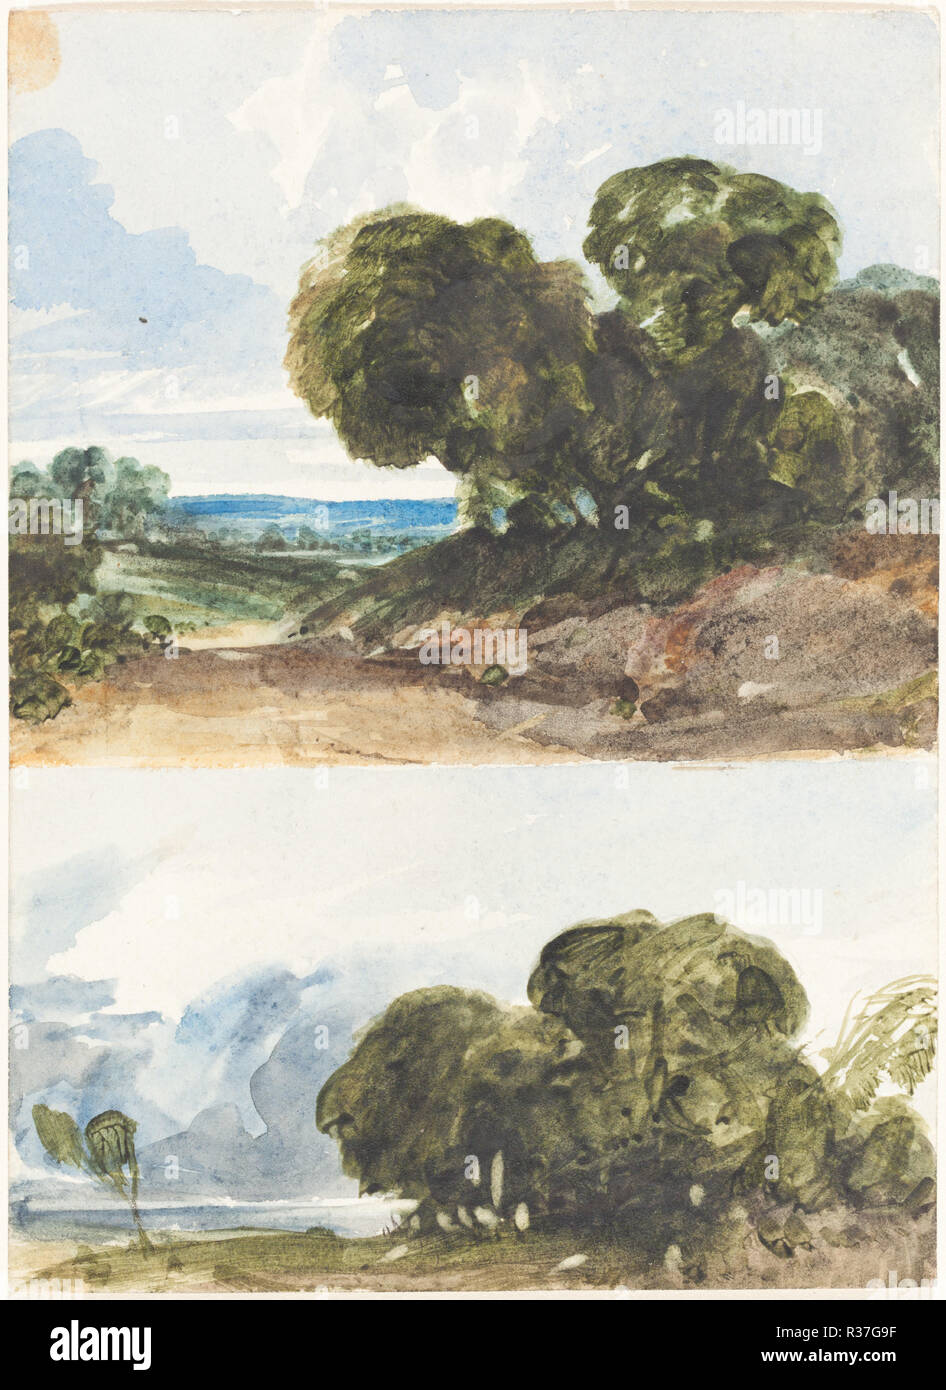 Two Sketches of Trees. Dimensions: overall (approximate): 17 x 12.4 cm (6 11/16 x 4 7/8 in.). Medium: watercolor. Museum: National Gallery of Art, Washington DC. Author: Attributed to James Bulwer. Stock Photo